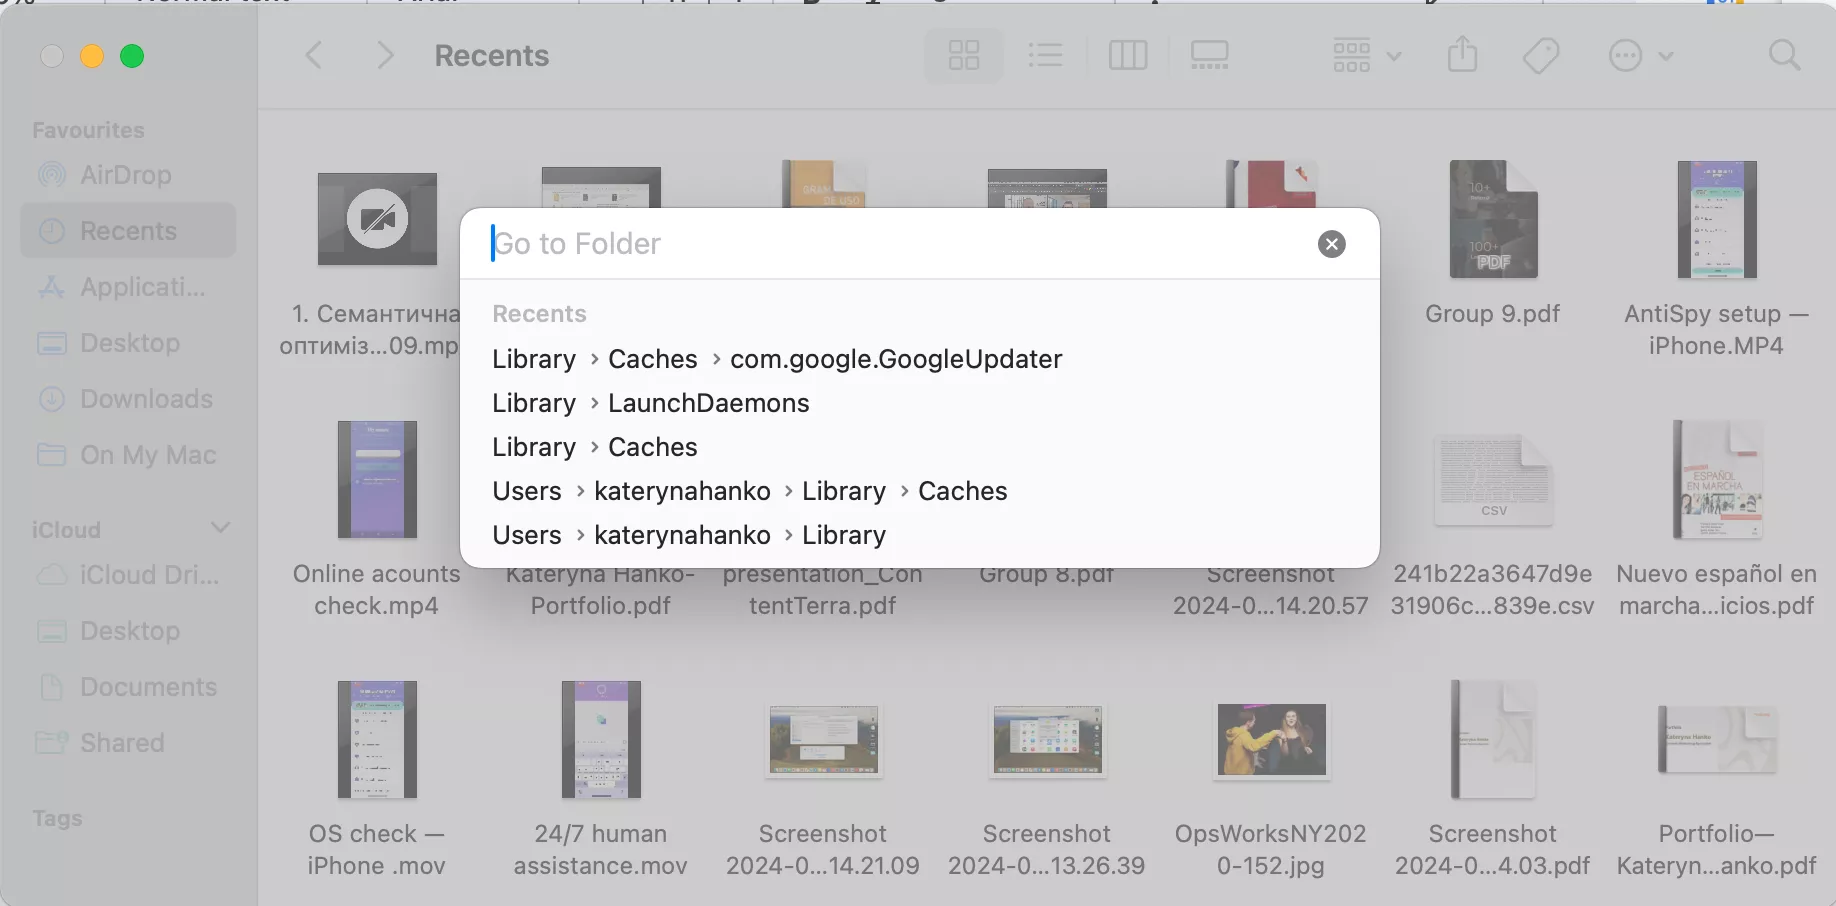 The Finder app opened on Mac which depicts how to launch Got to Folder using Shift + Command + G command to begin the process to clear cache on macOS Catalina.